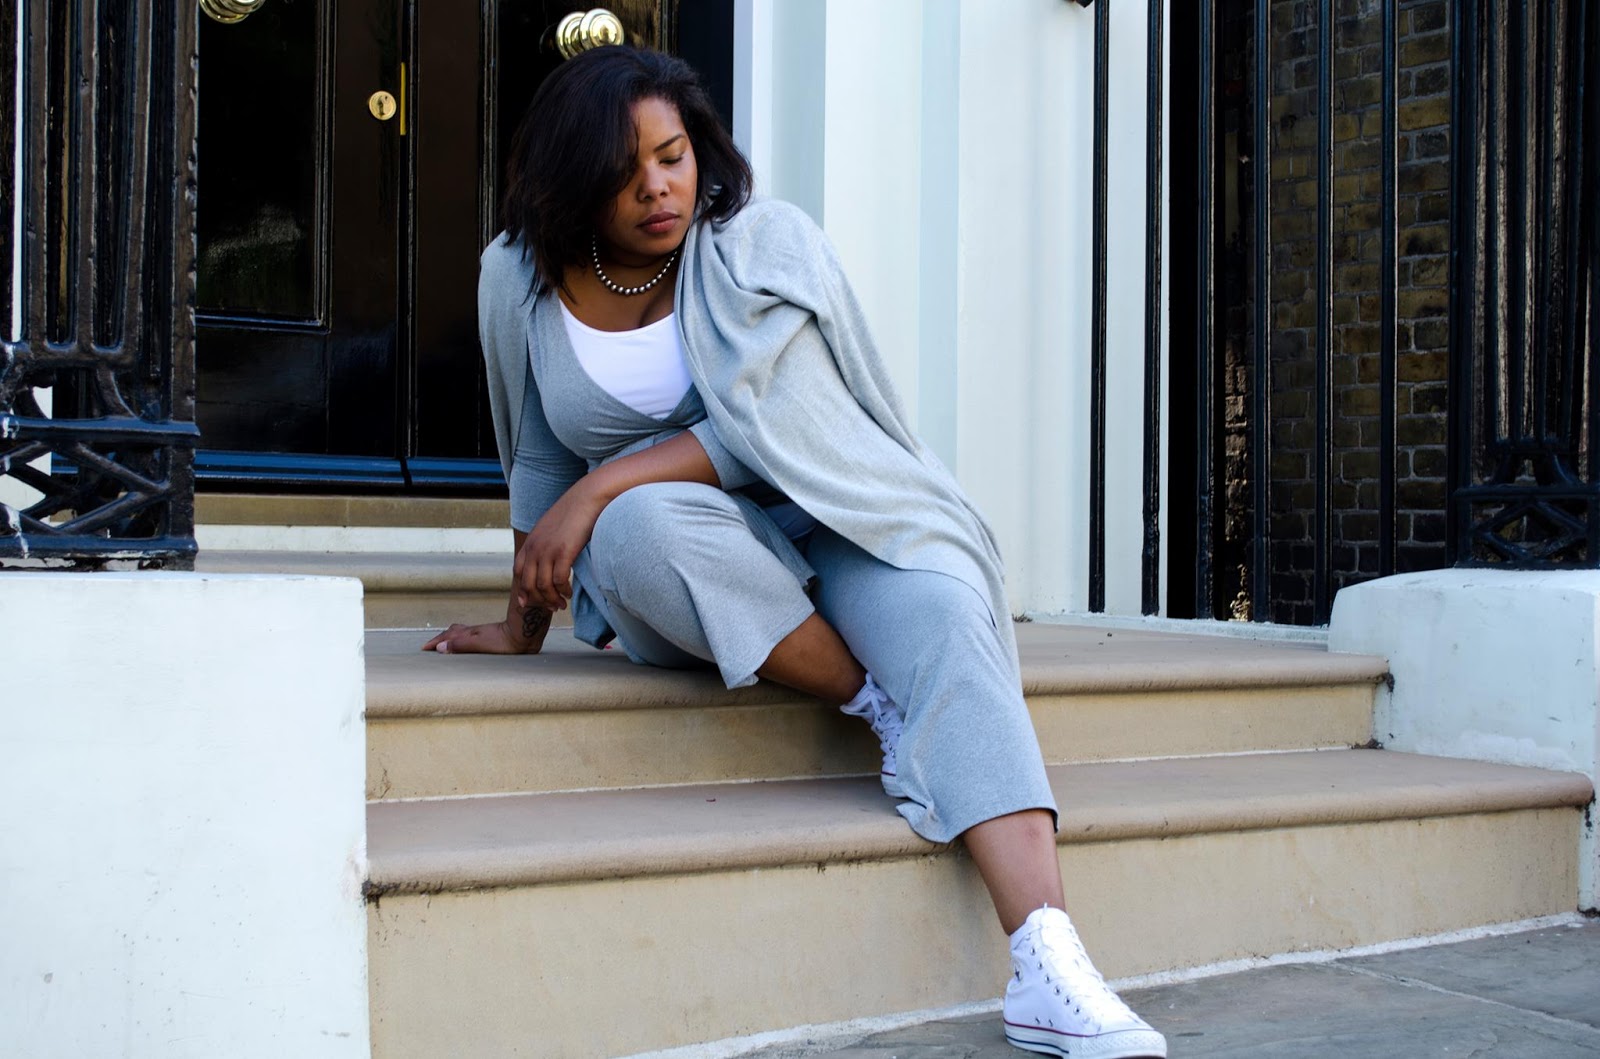 Plus size fashion: social media and its impact – an interview with Chloe Pierre